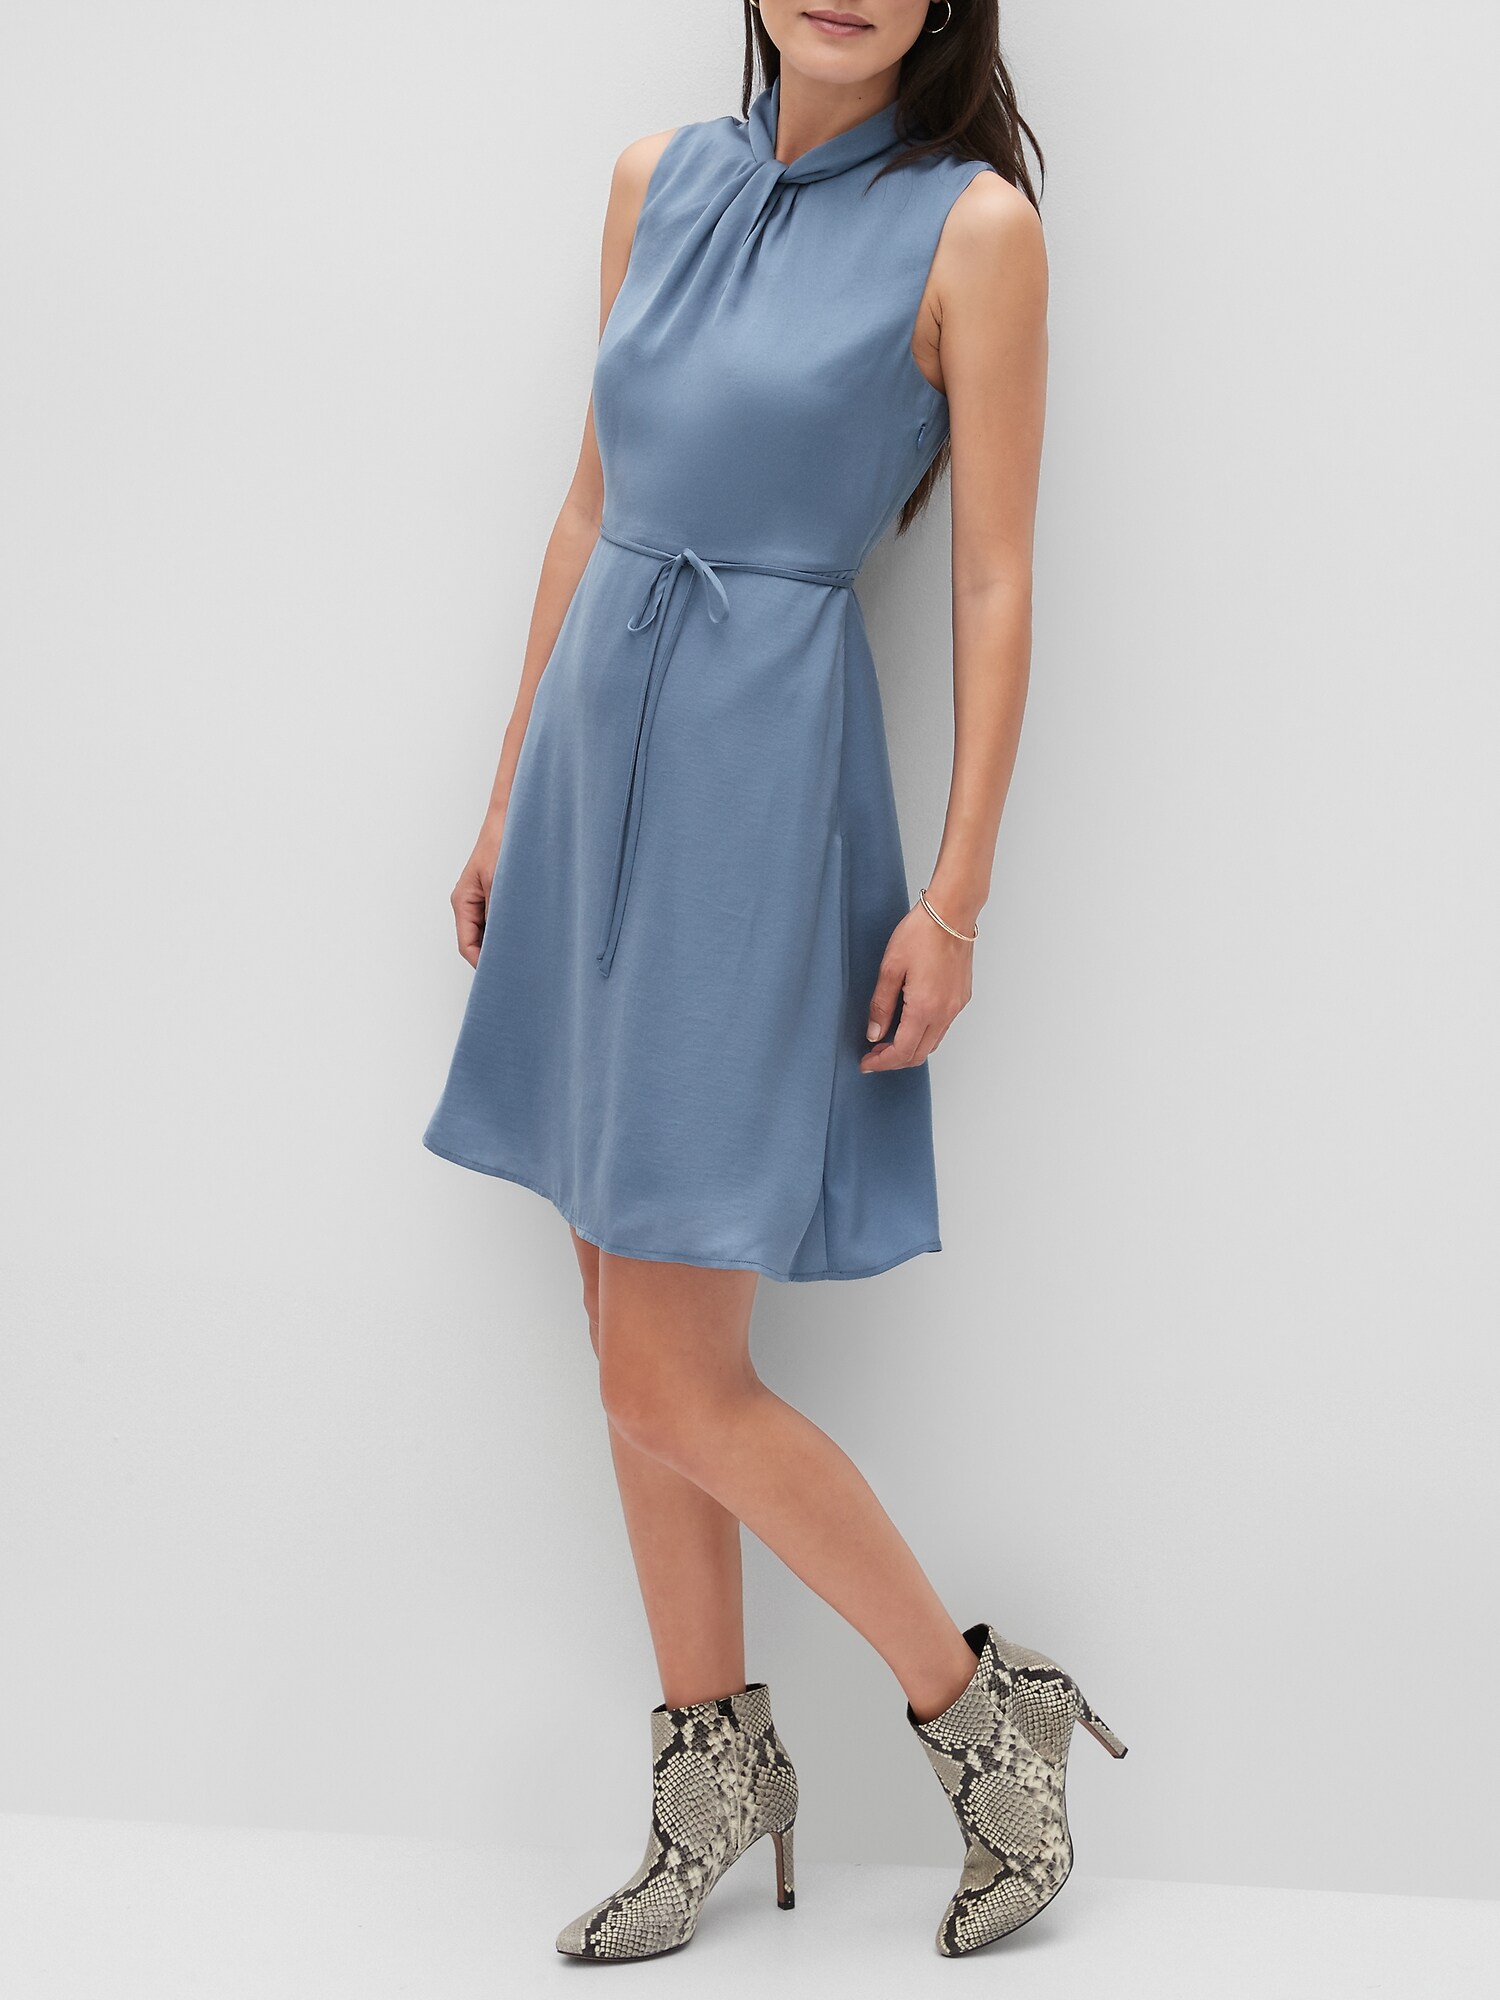 banana republic fit and flare dress